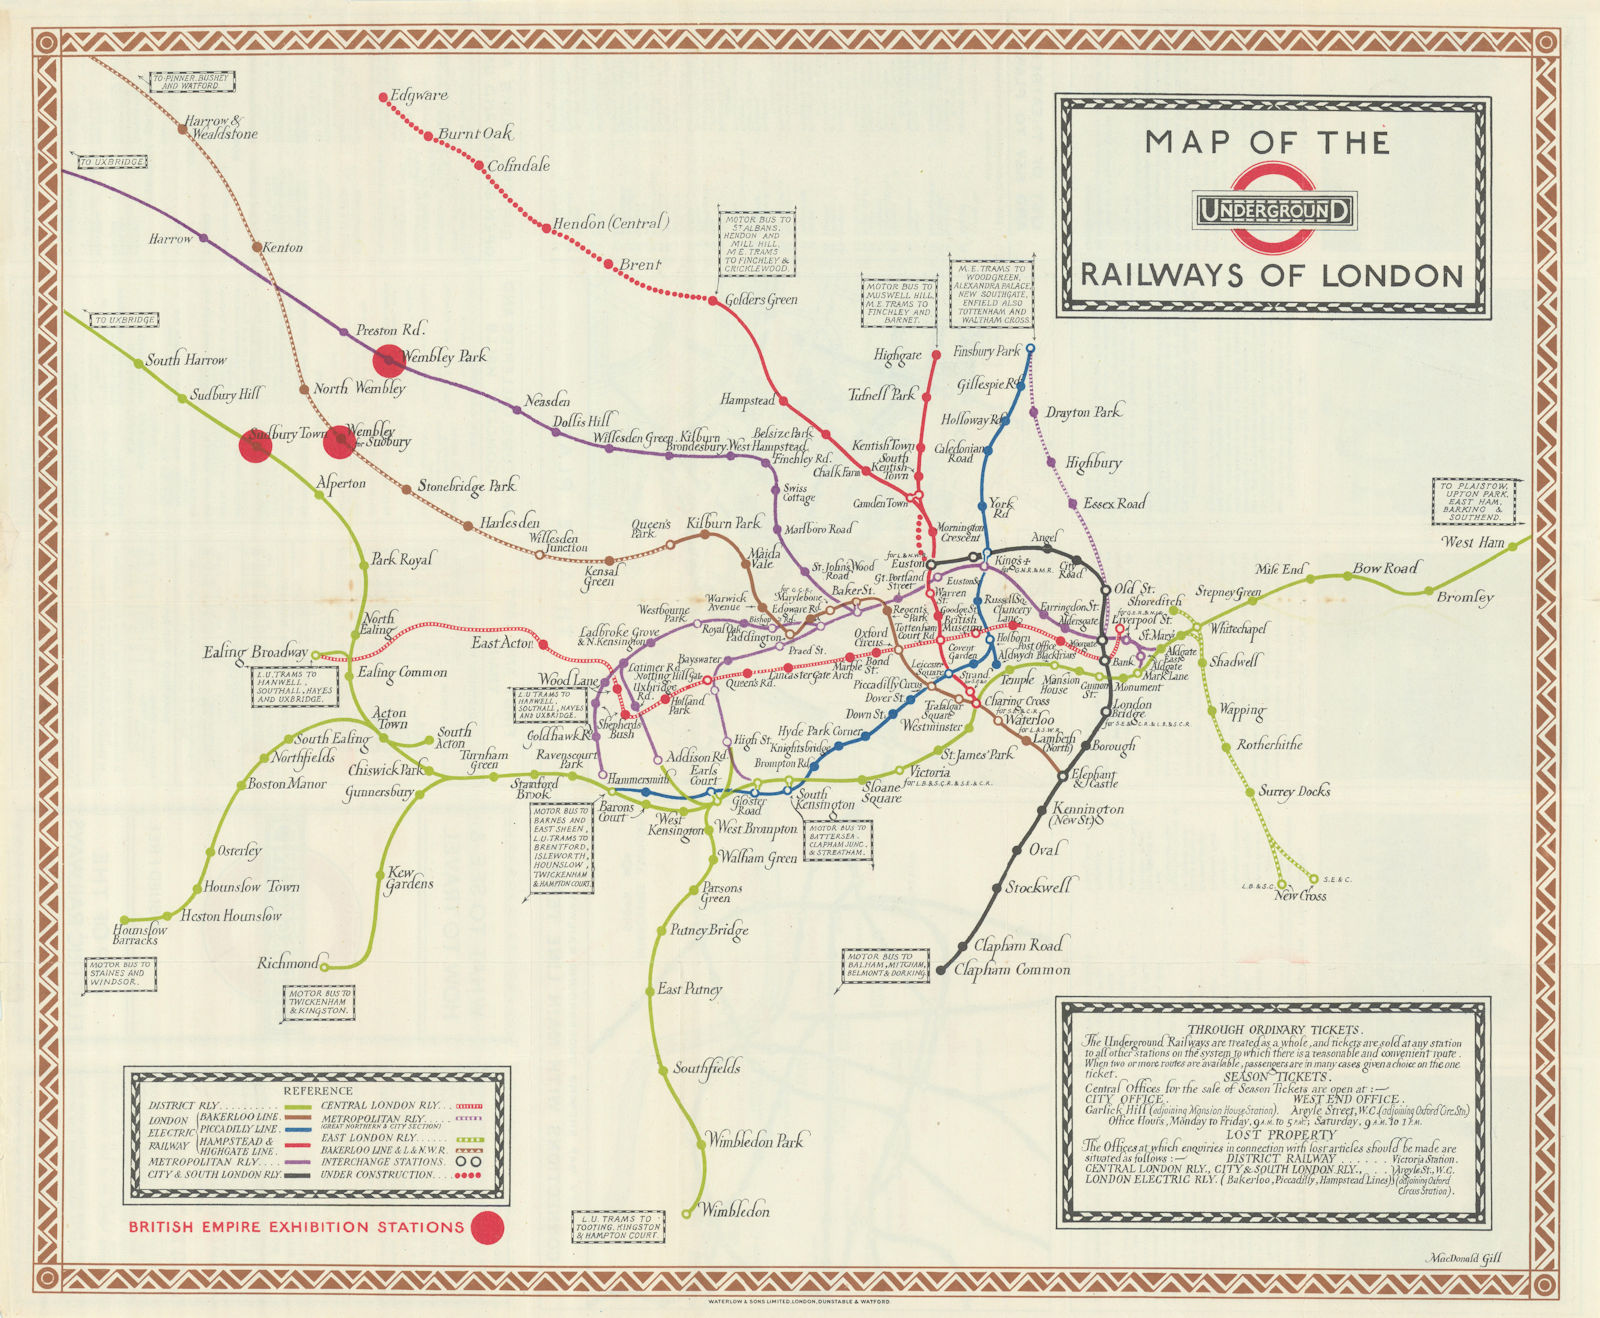 Associate Product Map of the Underground Railways of London by Macdonald Gill. January 1923